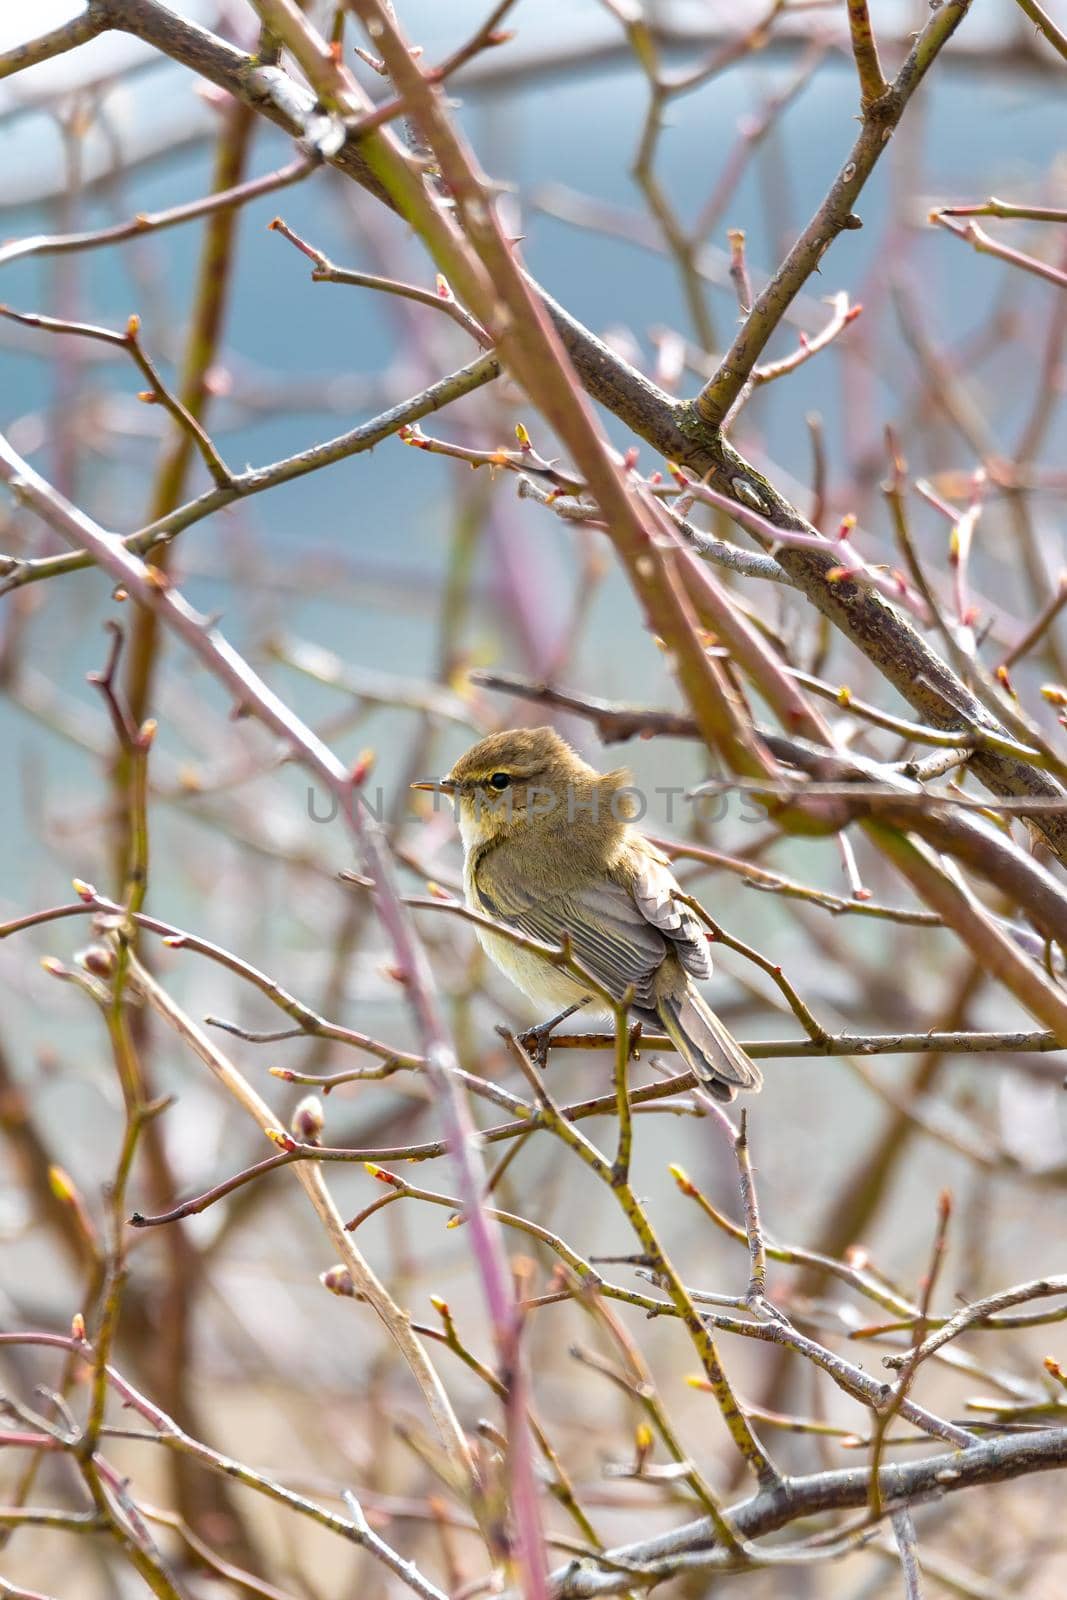 small song bird Willow Warbler (Phylloscopus trochilus) sitting on the branch. Little songbird in the natural habitat. Spring time. Czech Republic, Europe wildlife